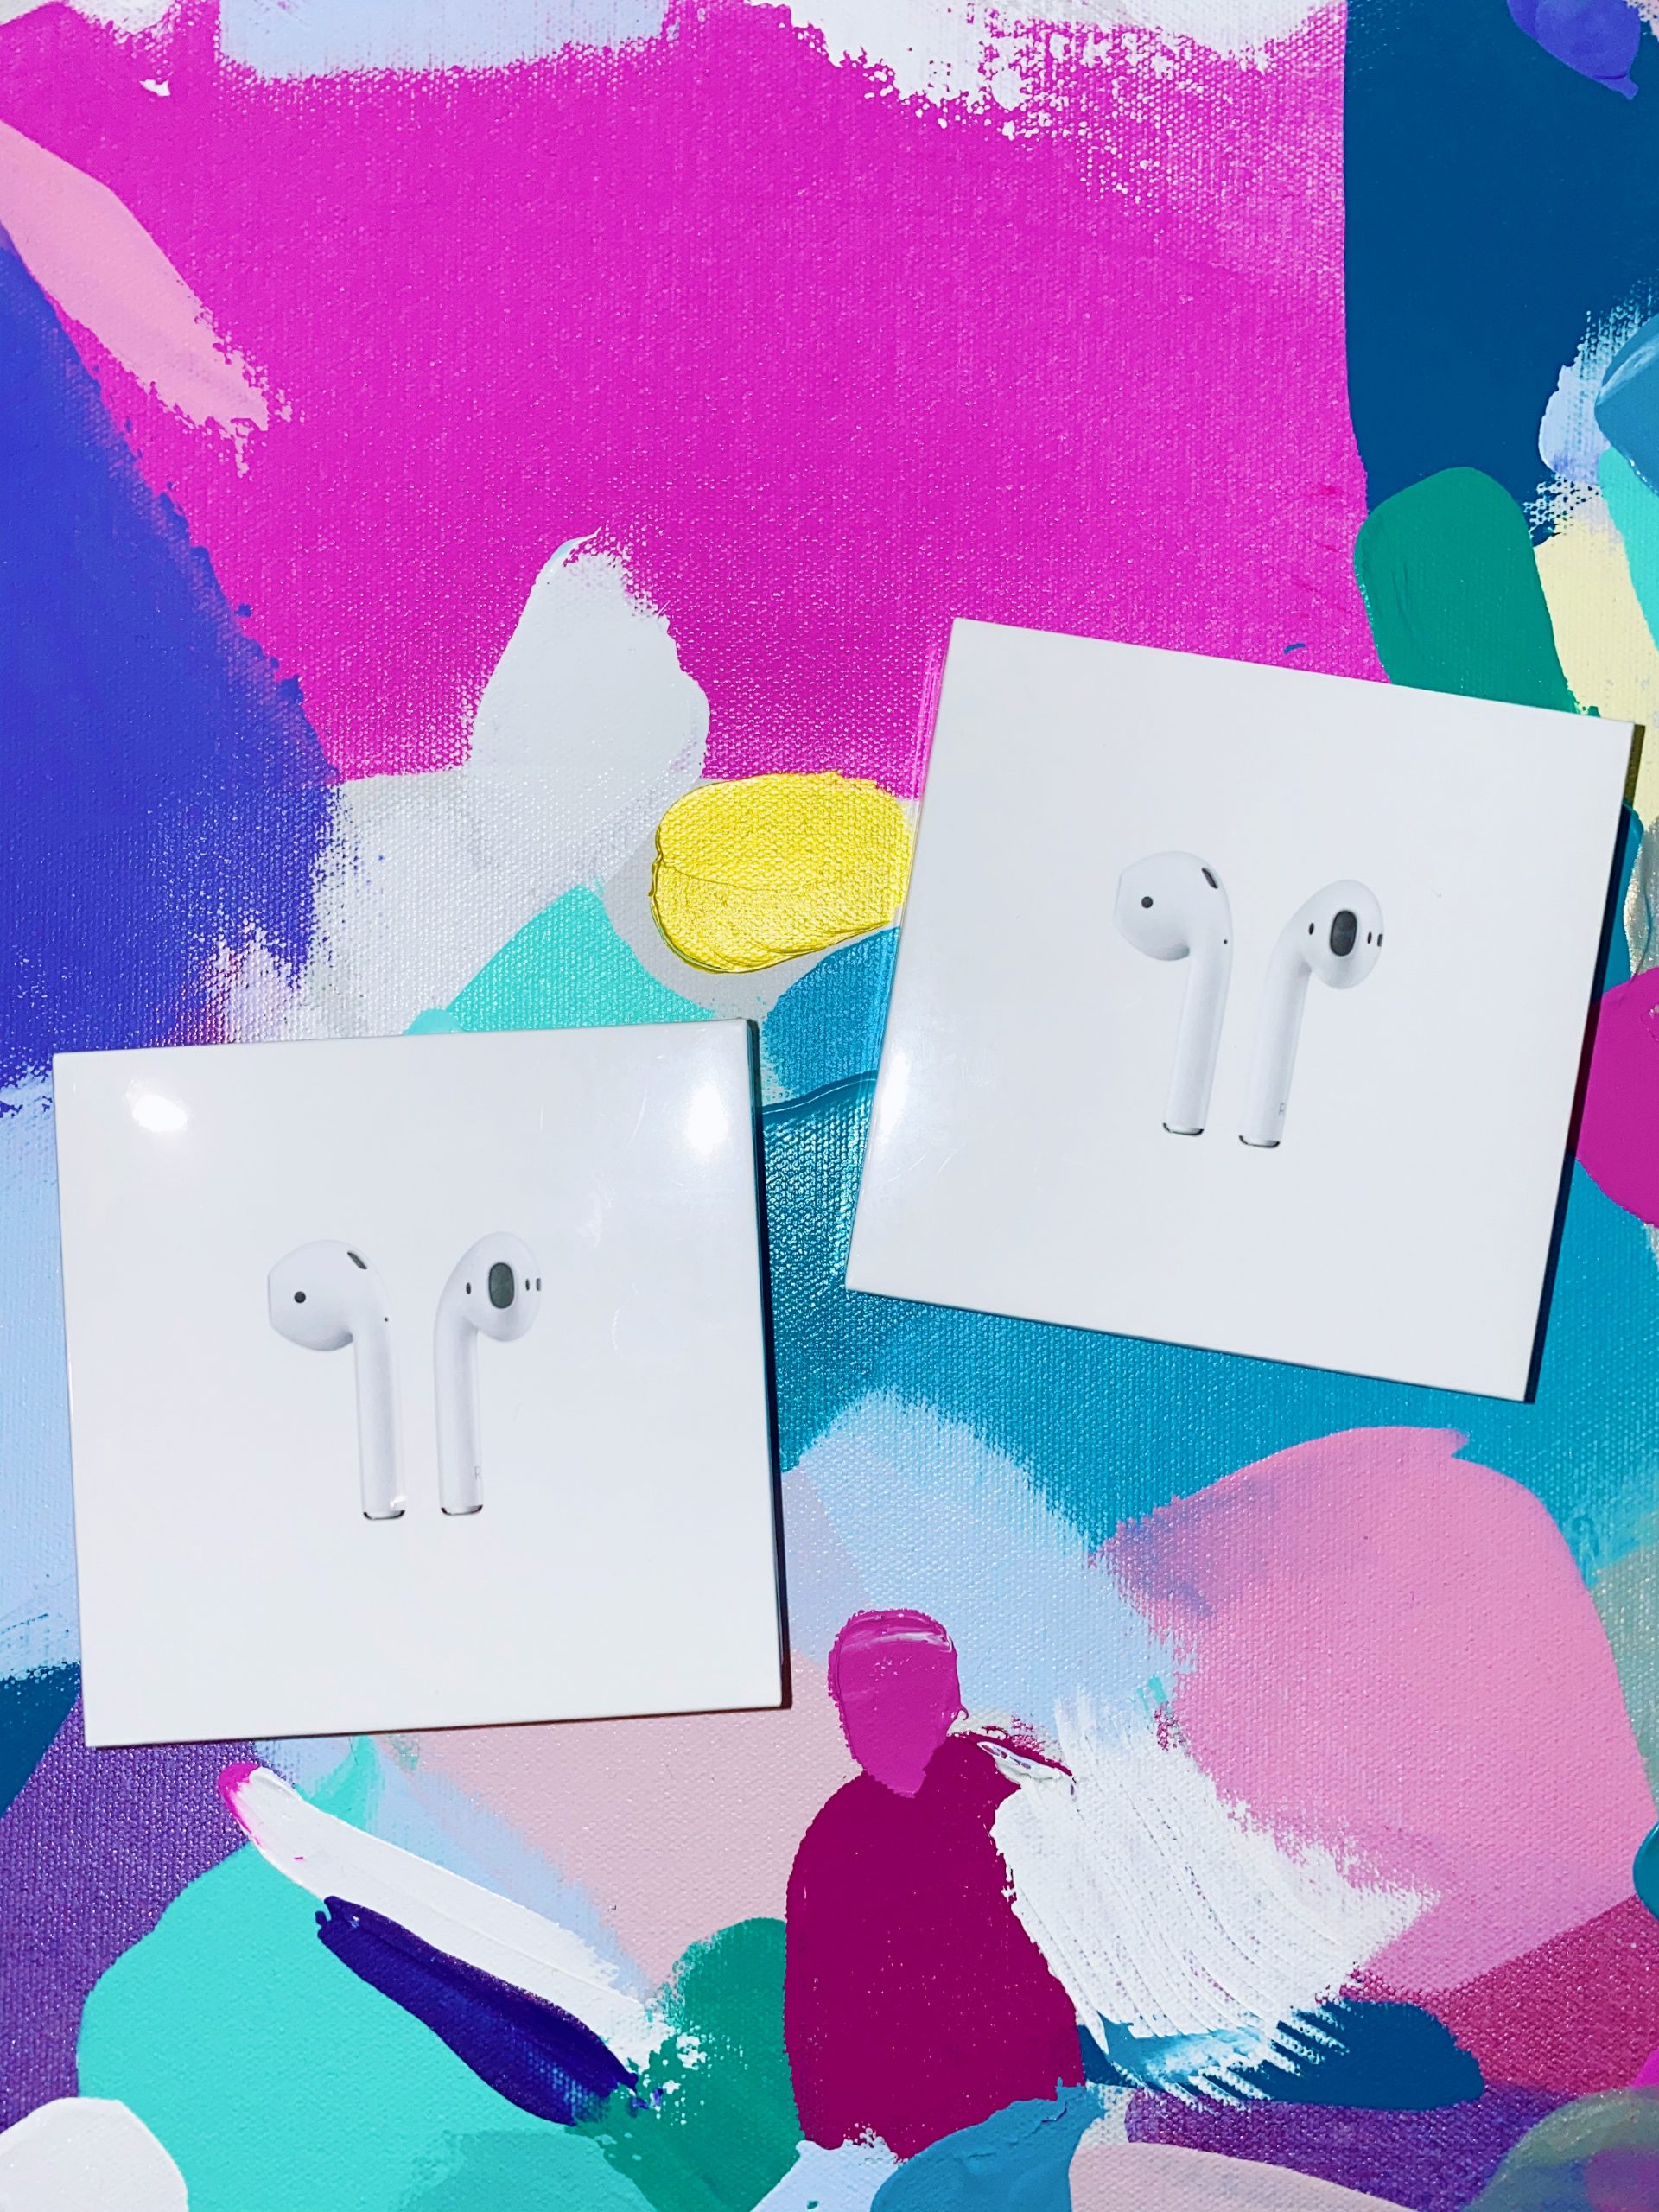 WIN two pairs of Apple AirPods with charging case for you and your bestie thanks to the legends over at Century 21 City Inner North at Prospect